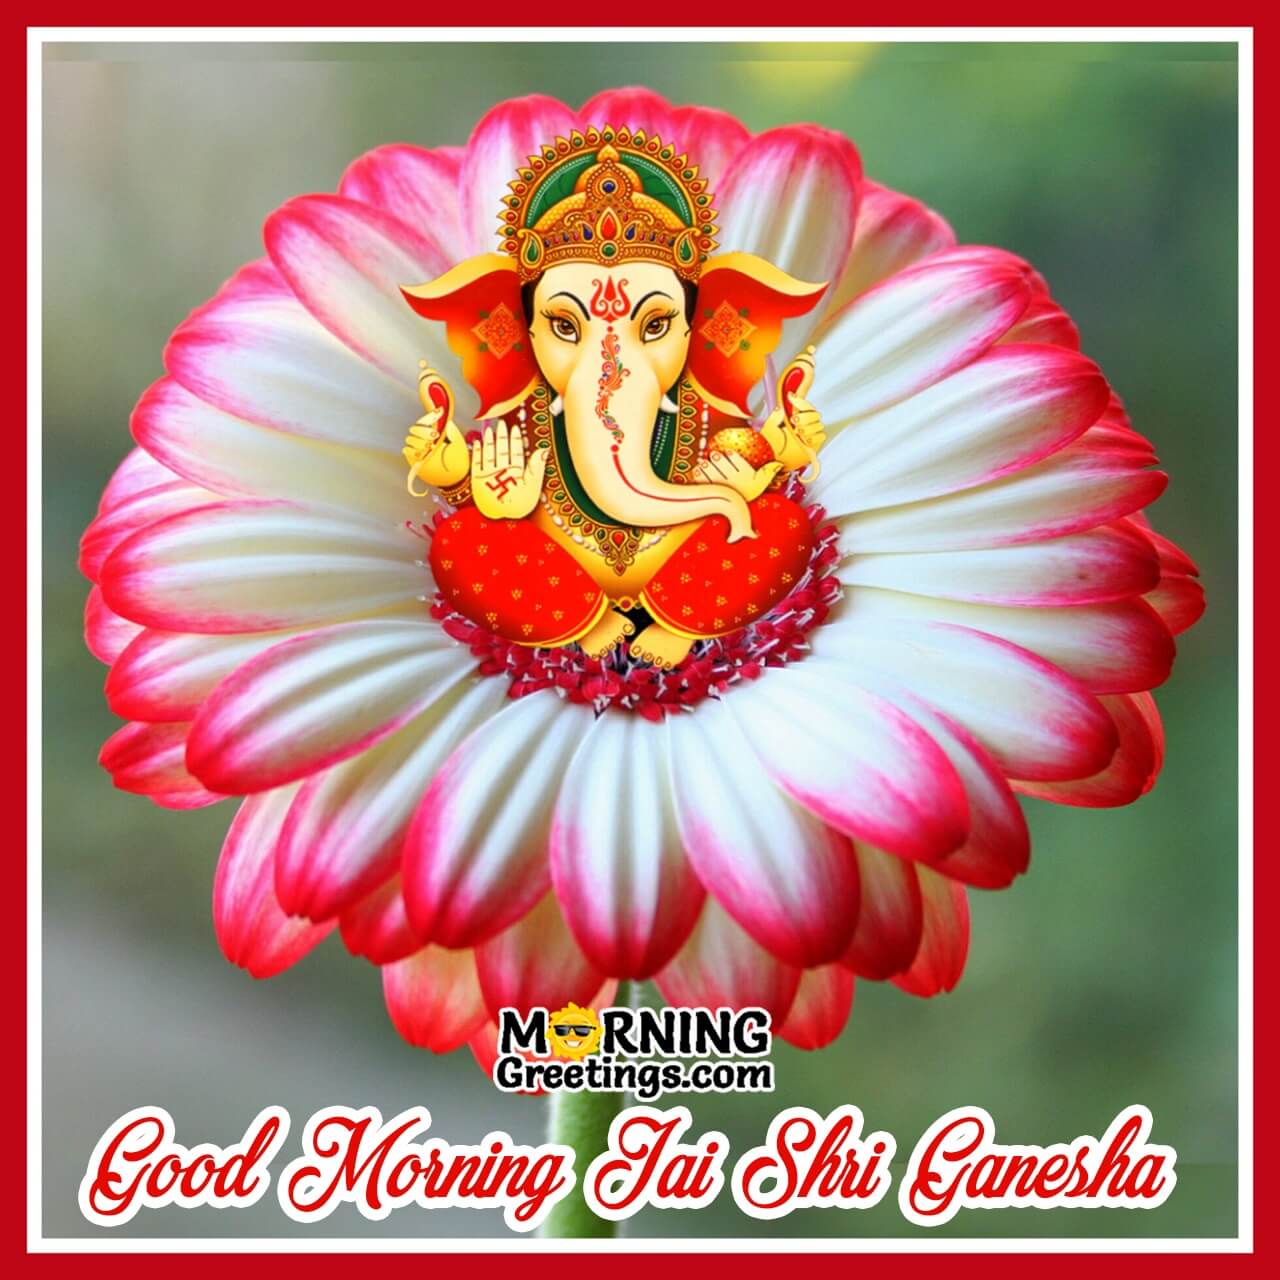 10 Most Beautiful Bal Ganesha Pictures - Morning Greetings ...